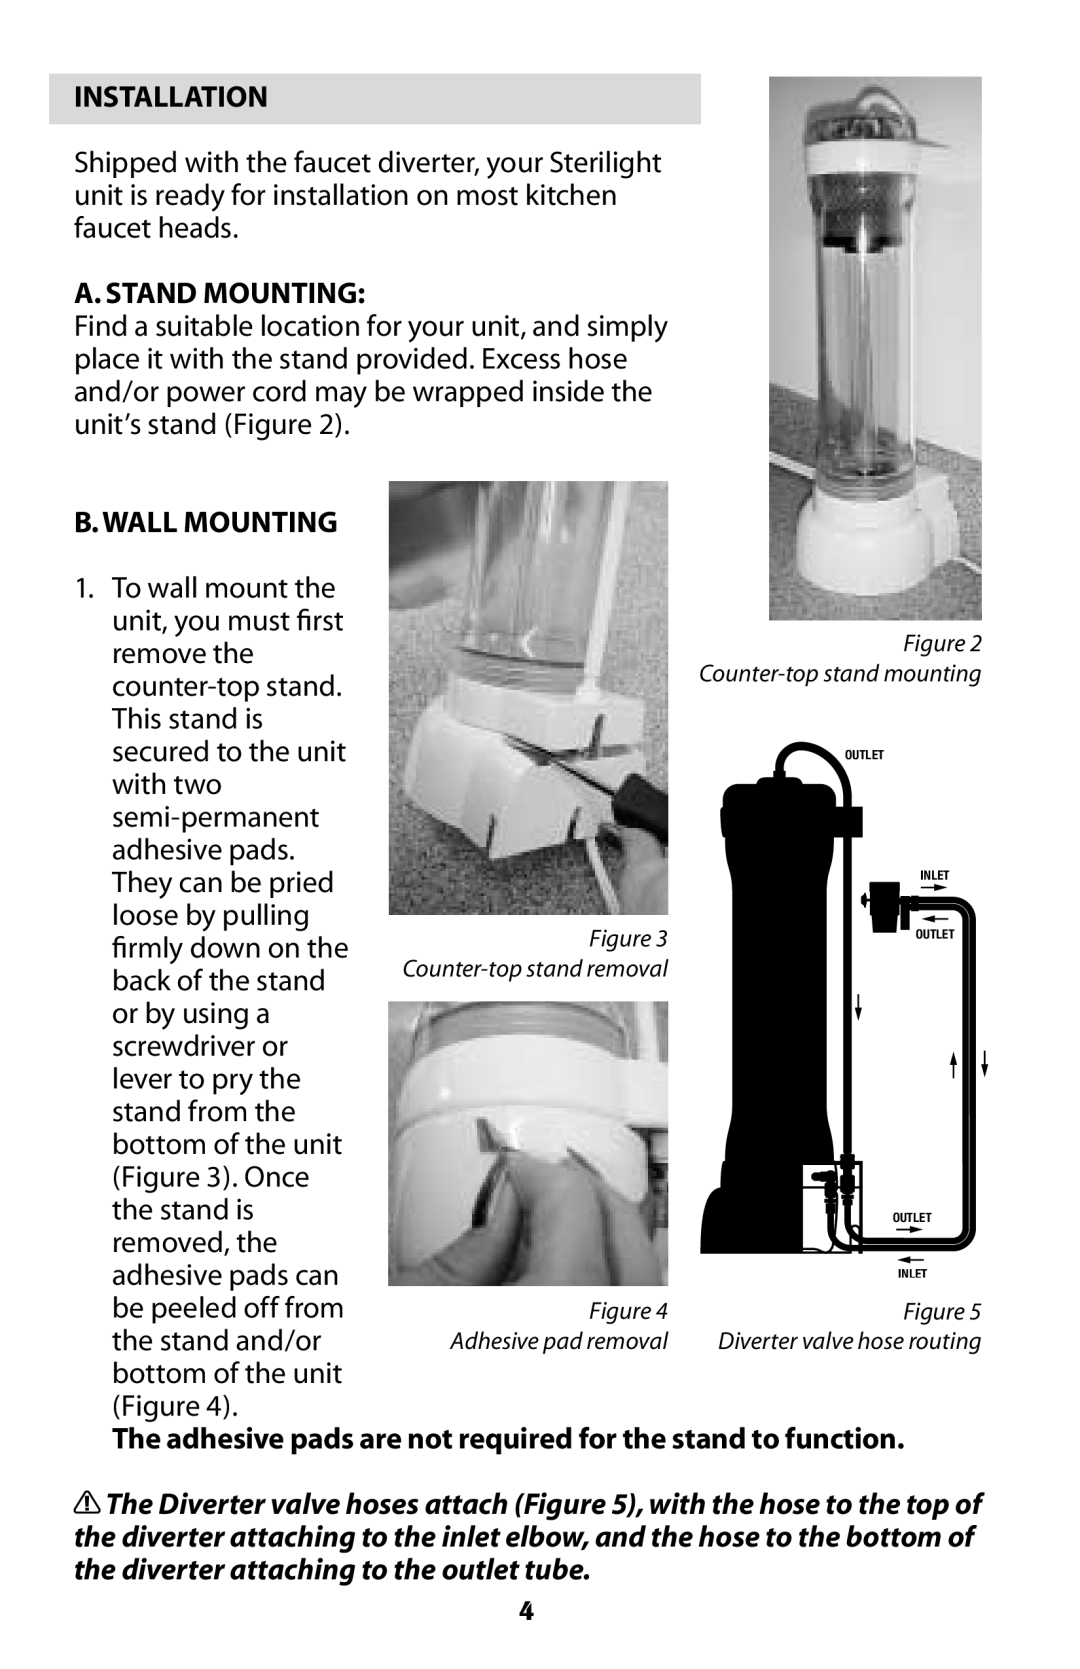 Sterilite Point-of-Use Drinking Water System owner manual Installation, A. Stand Mounting, B. Wall Mounting 